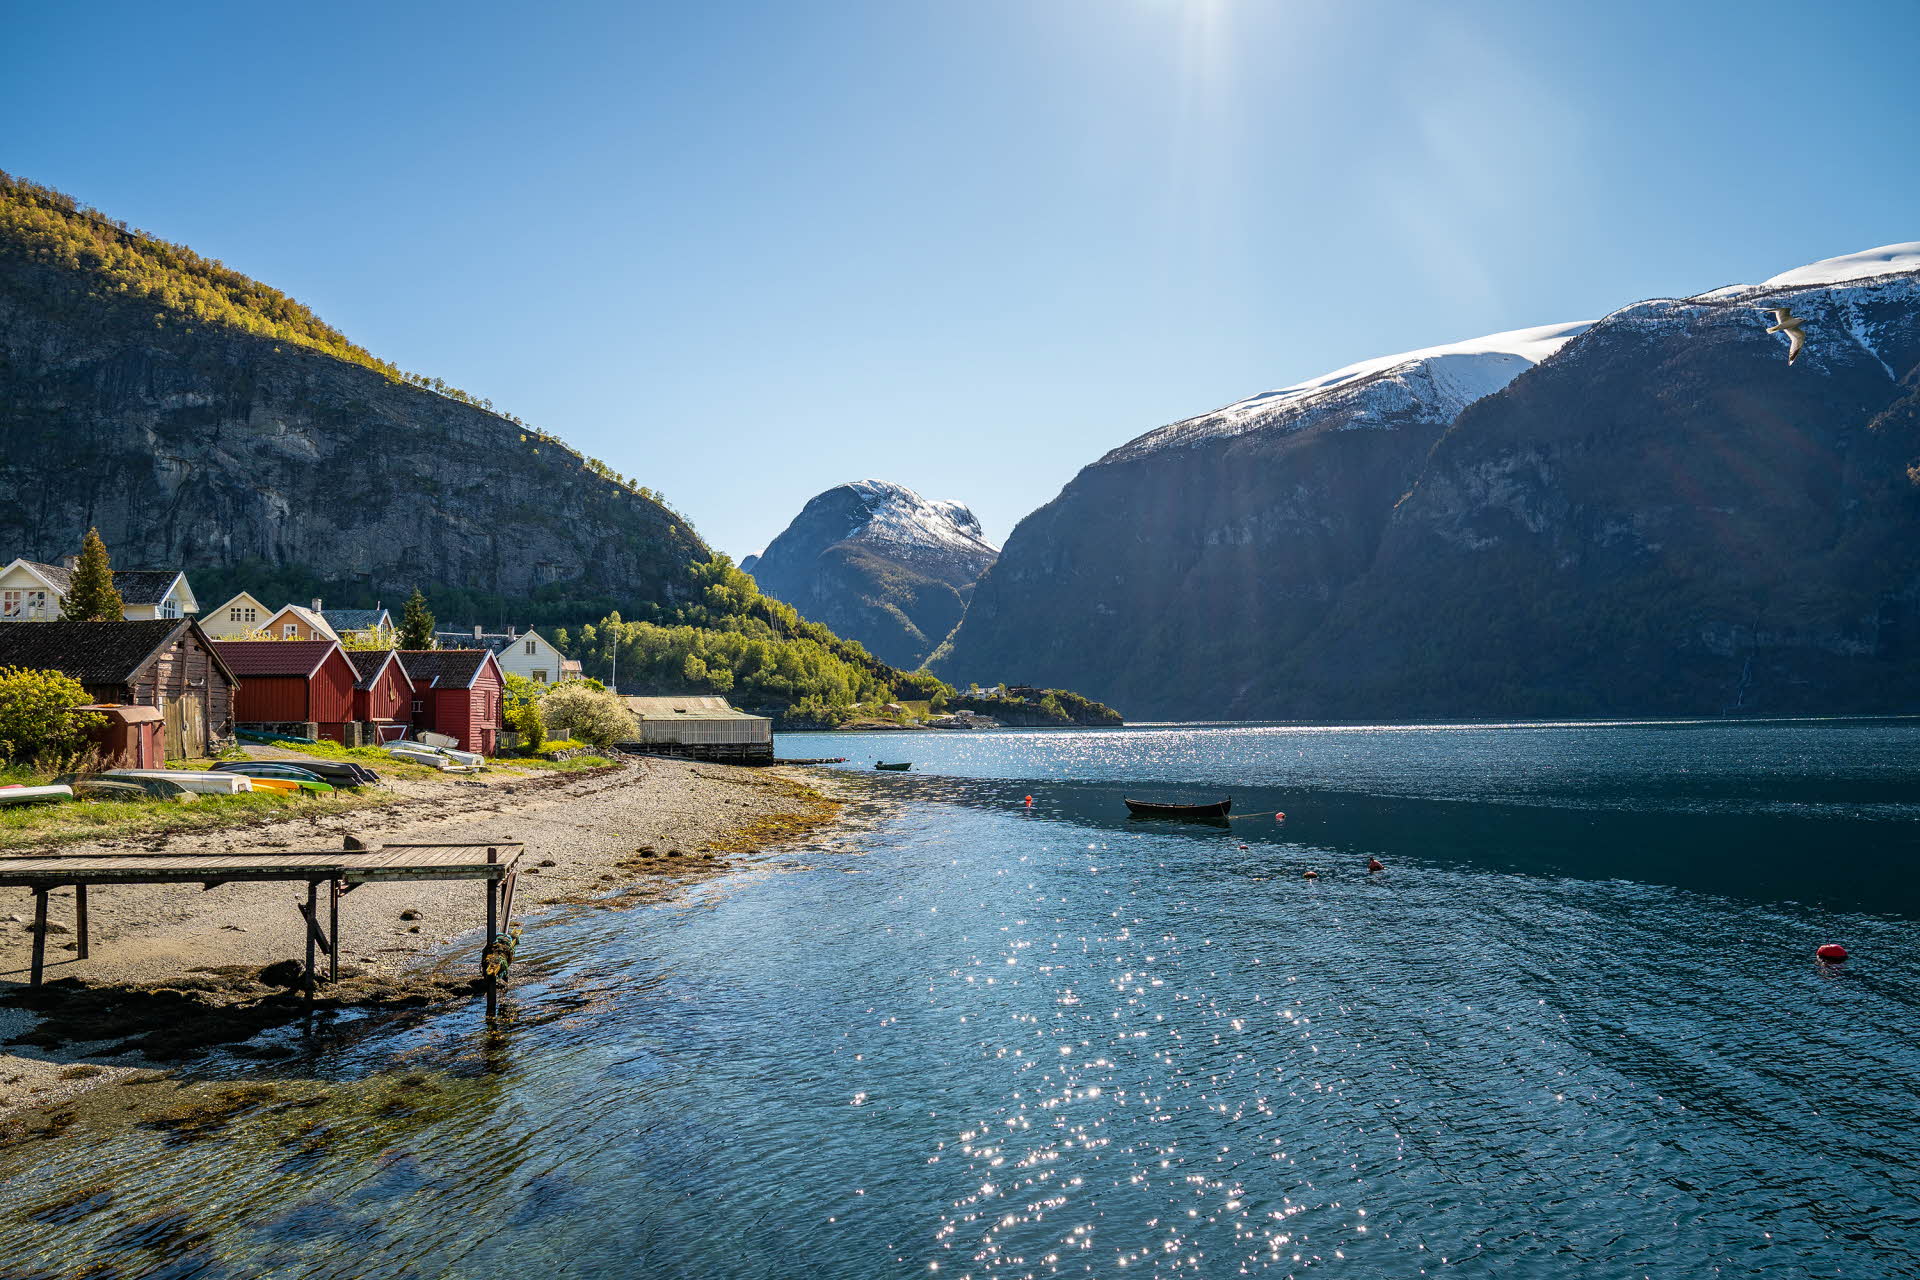 Boat houses at the shoreline by the UNESCO listed Aurlandsfjord in summer. Lush mountain sides with snow-capped mountains